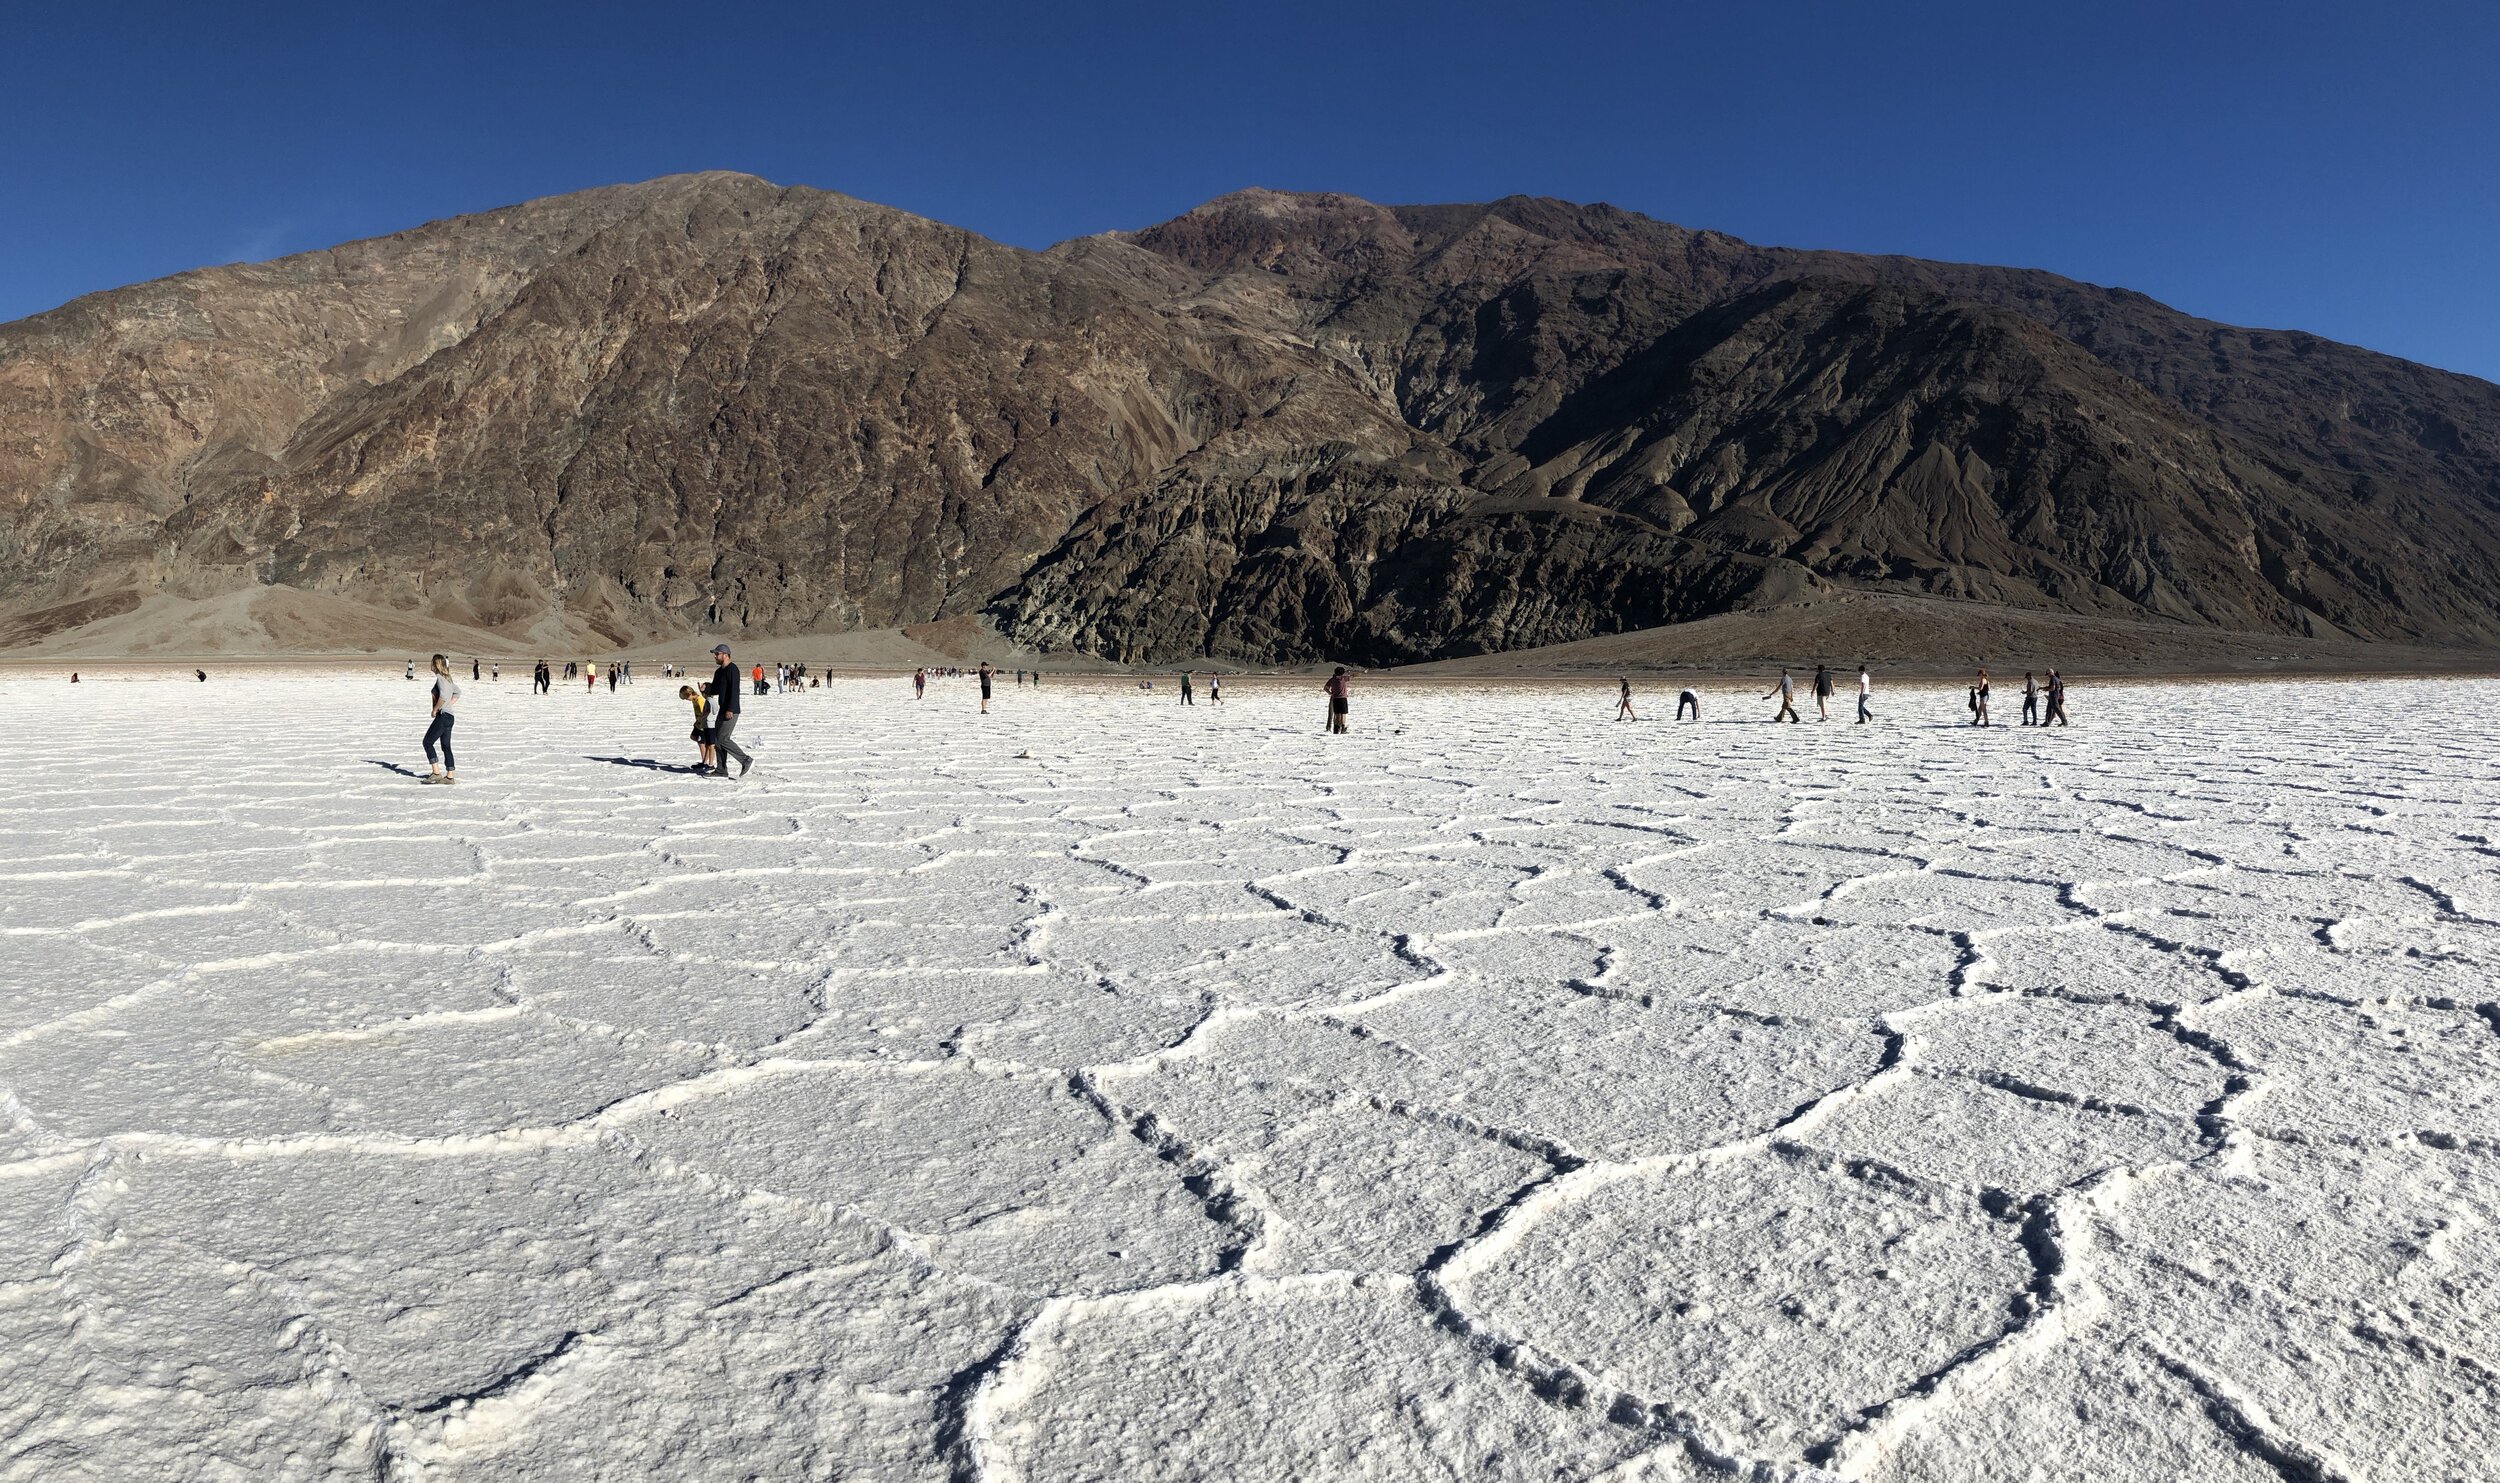 All visitors should walk at Badwater Basin, 282 feet below sea level, site of the hottest recorded temperature in North America.  (Don’t walk there in summer!)